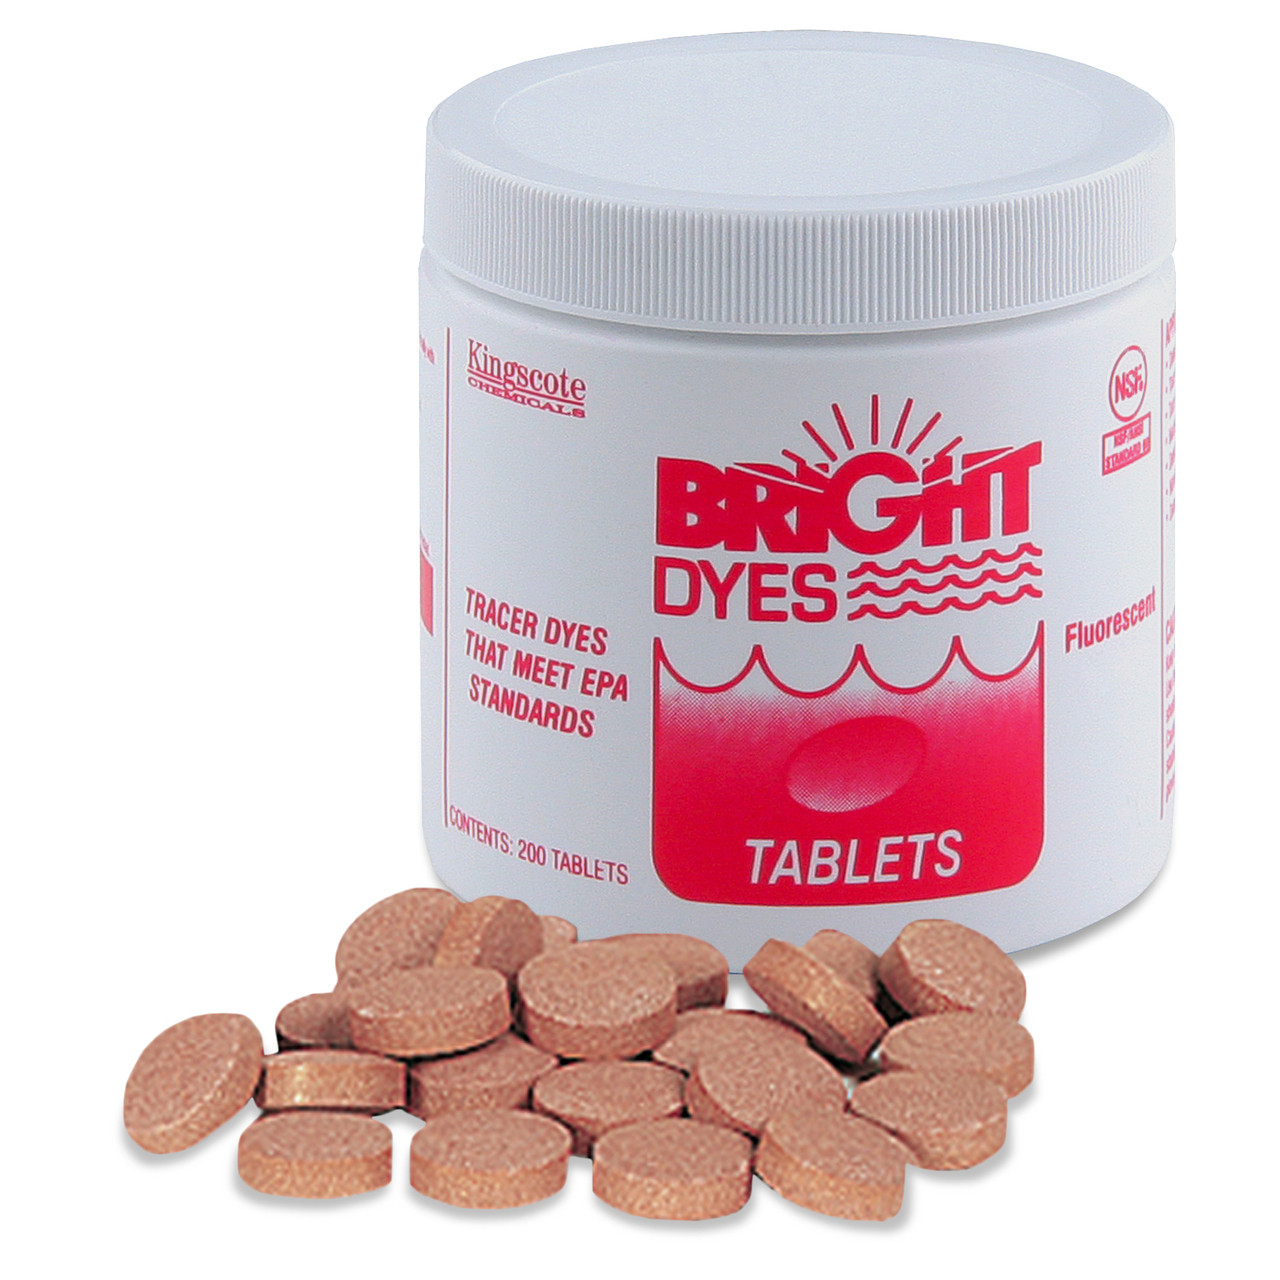 Bright Dyes Water Tracing Dye, Red, 200 Tablets - Performance Results Plus,  Inc.